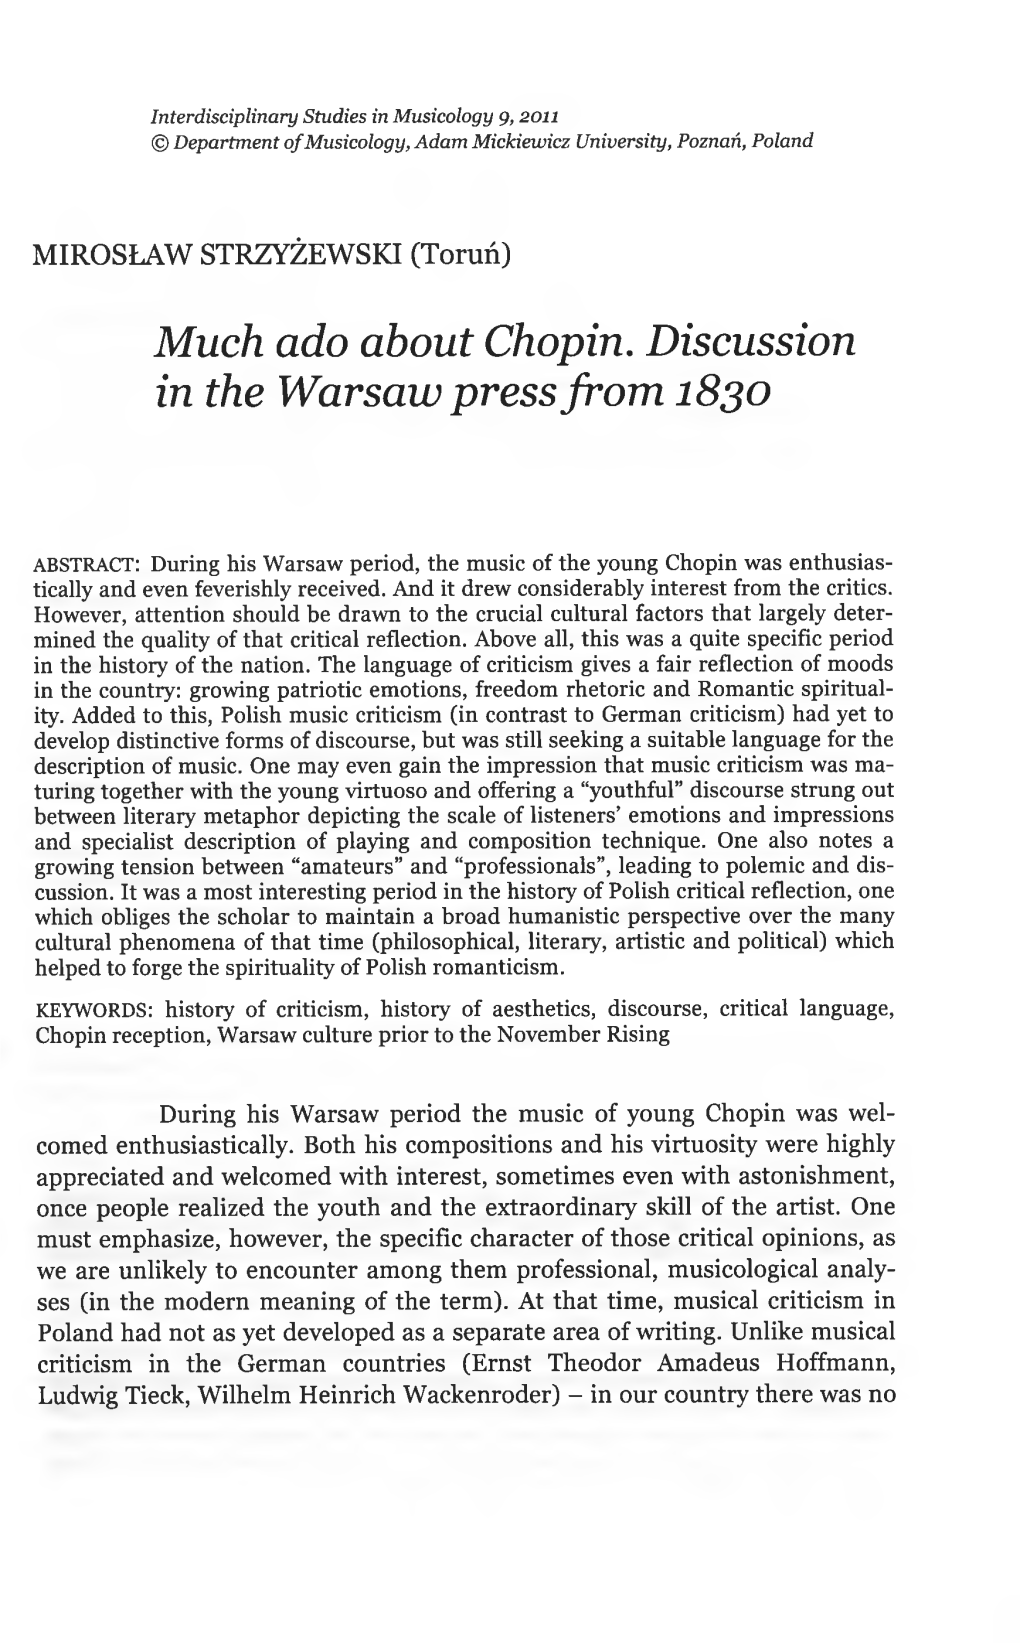 Much Ado About Chopin. Discussion in the Warsaw Press from 1830